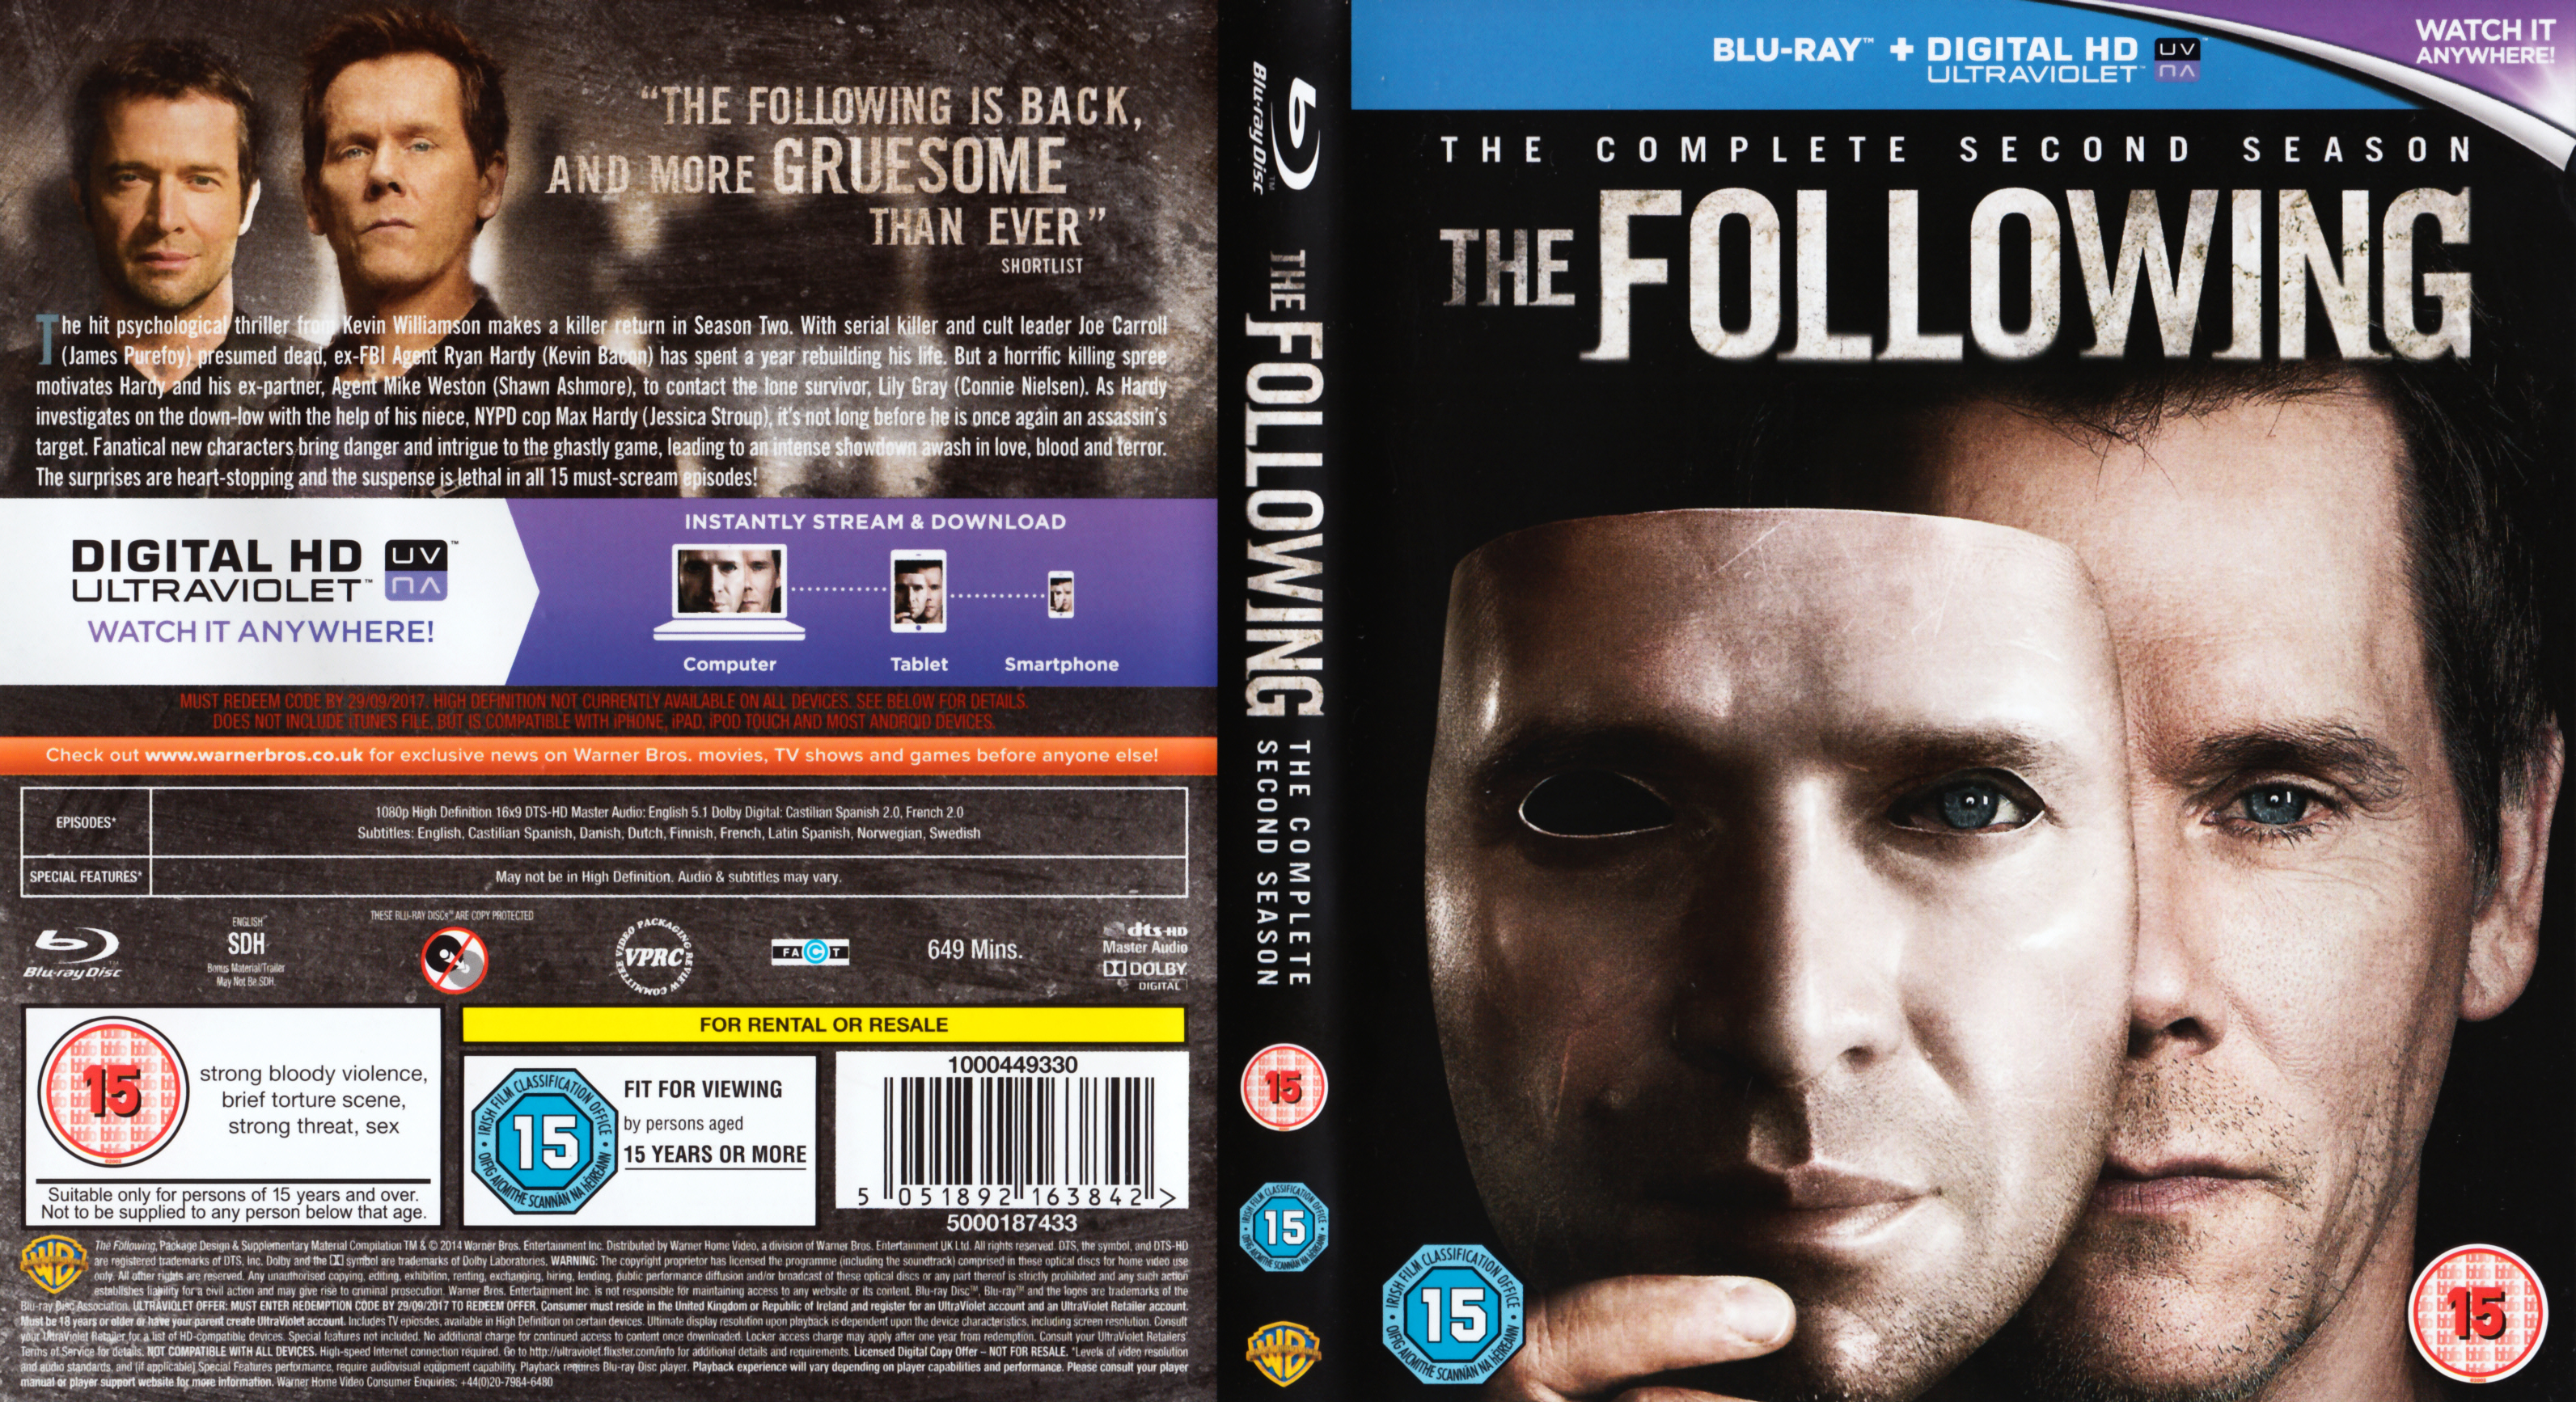 Jaquette DVD The following Saison 2 Zone 1 (BLU-RAY) v2